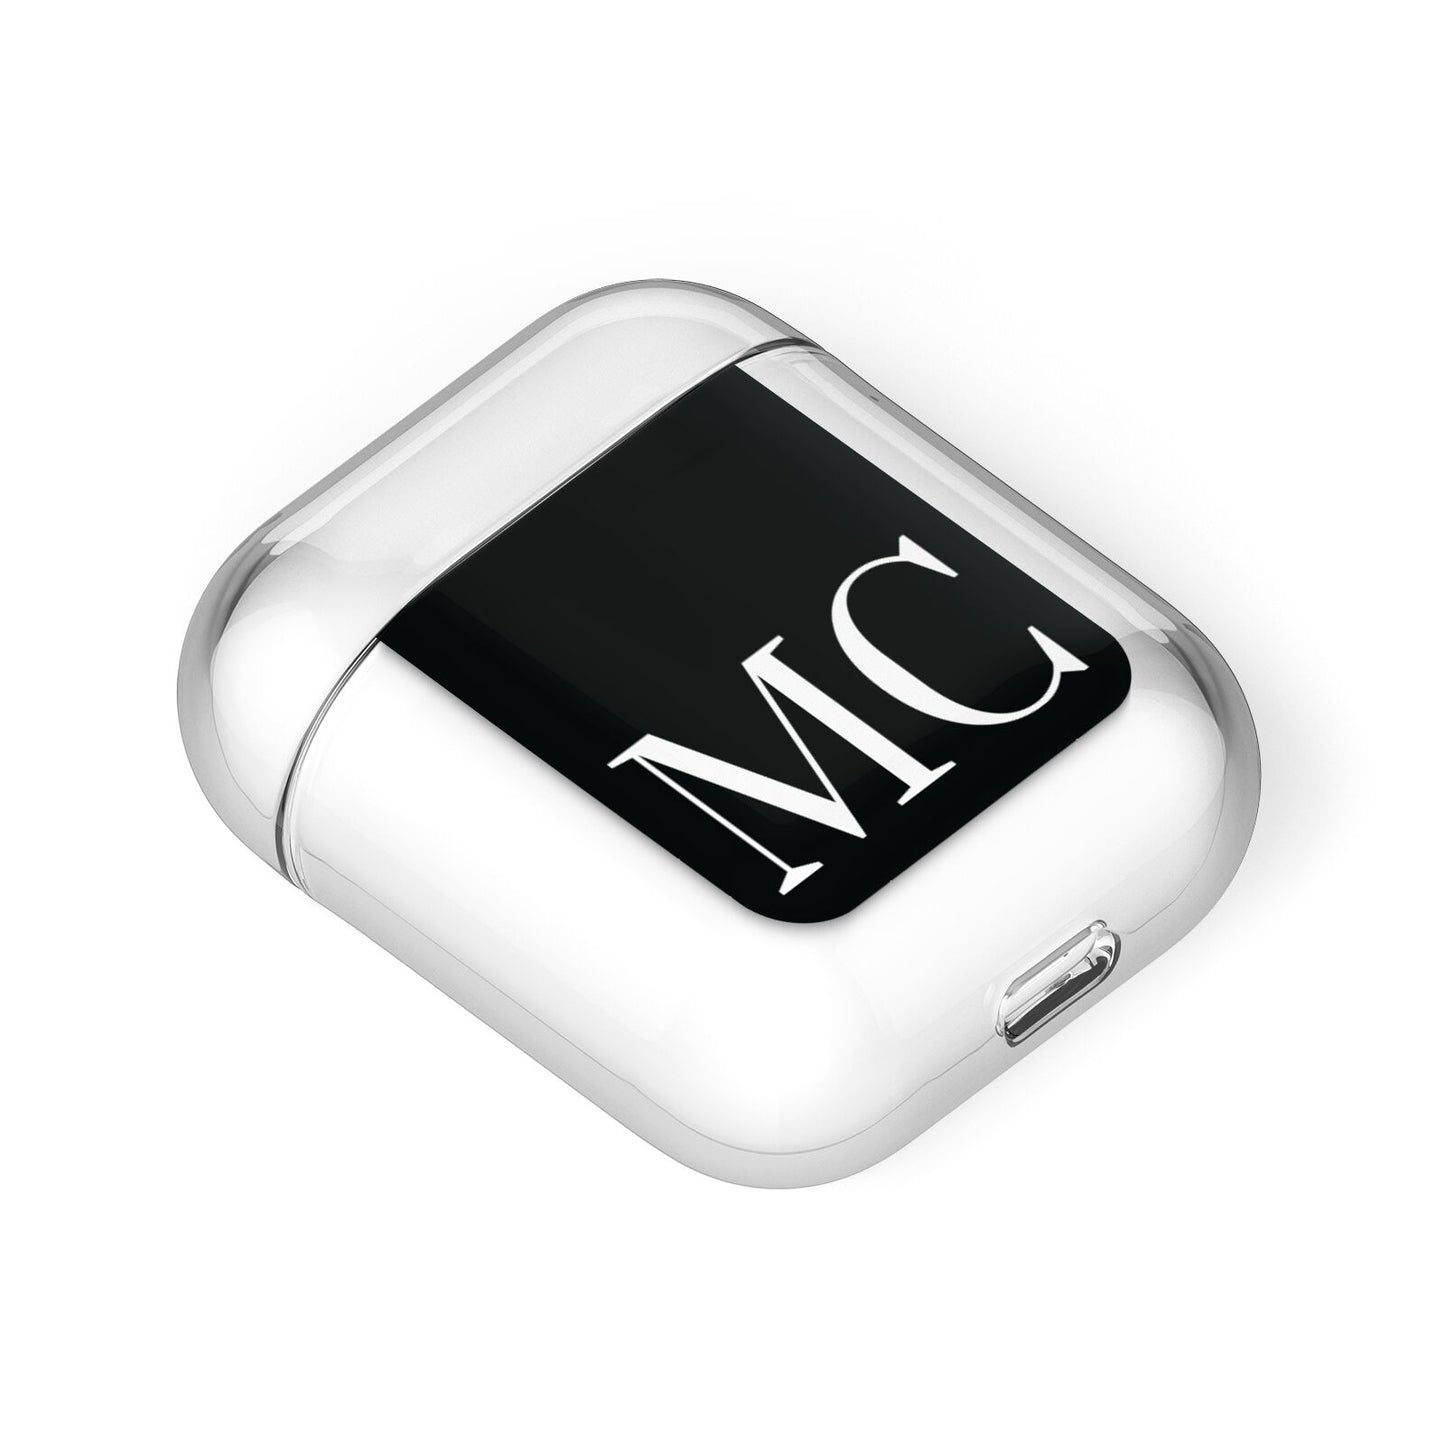 Initials Personalised 1 AirPods Case Laid Flat